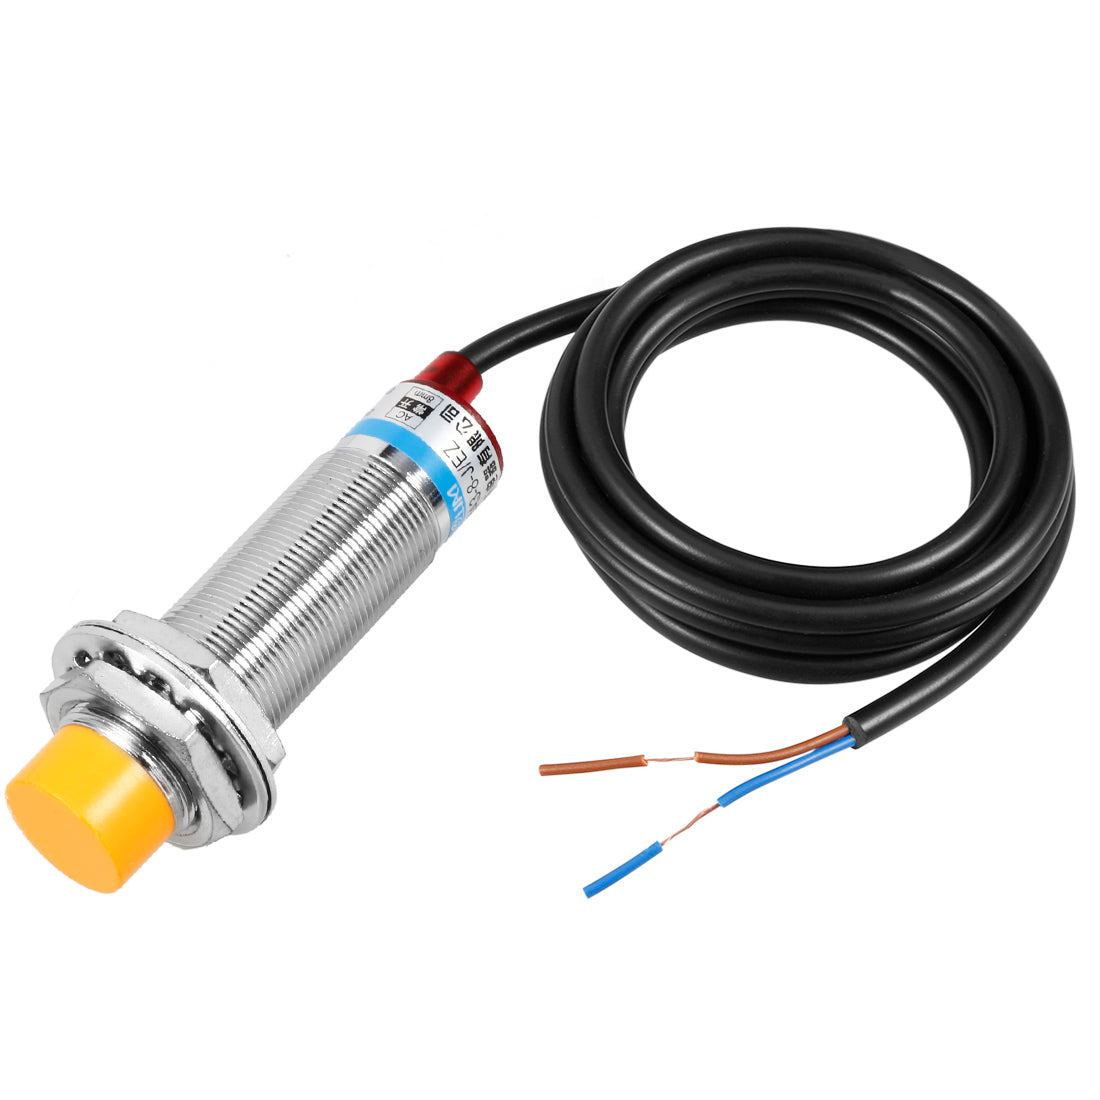 uxcell Uxcell LJ18A3-8-J/DZ AC90-250V 400mA 2 Wire NC 8mm Approach Sensor Inductive Proximity Switch with Yellow Button